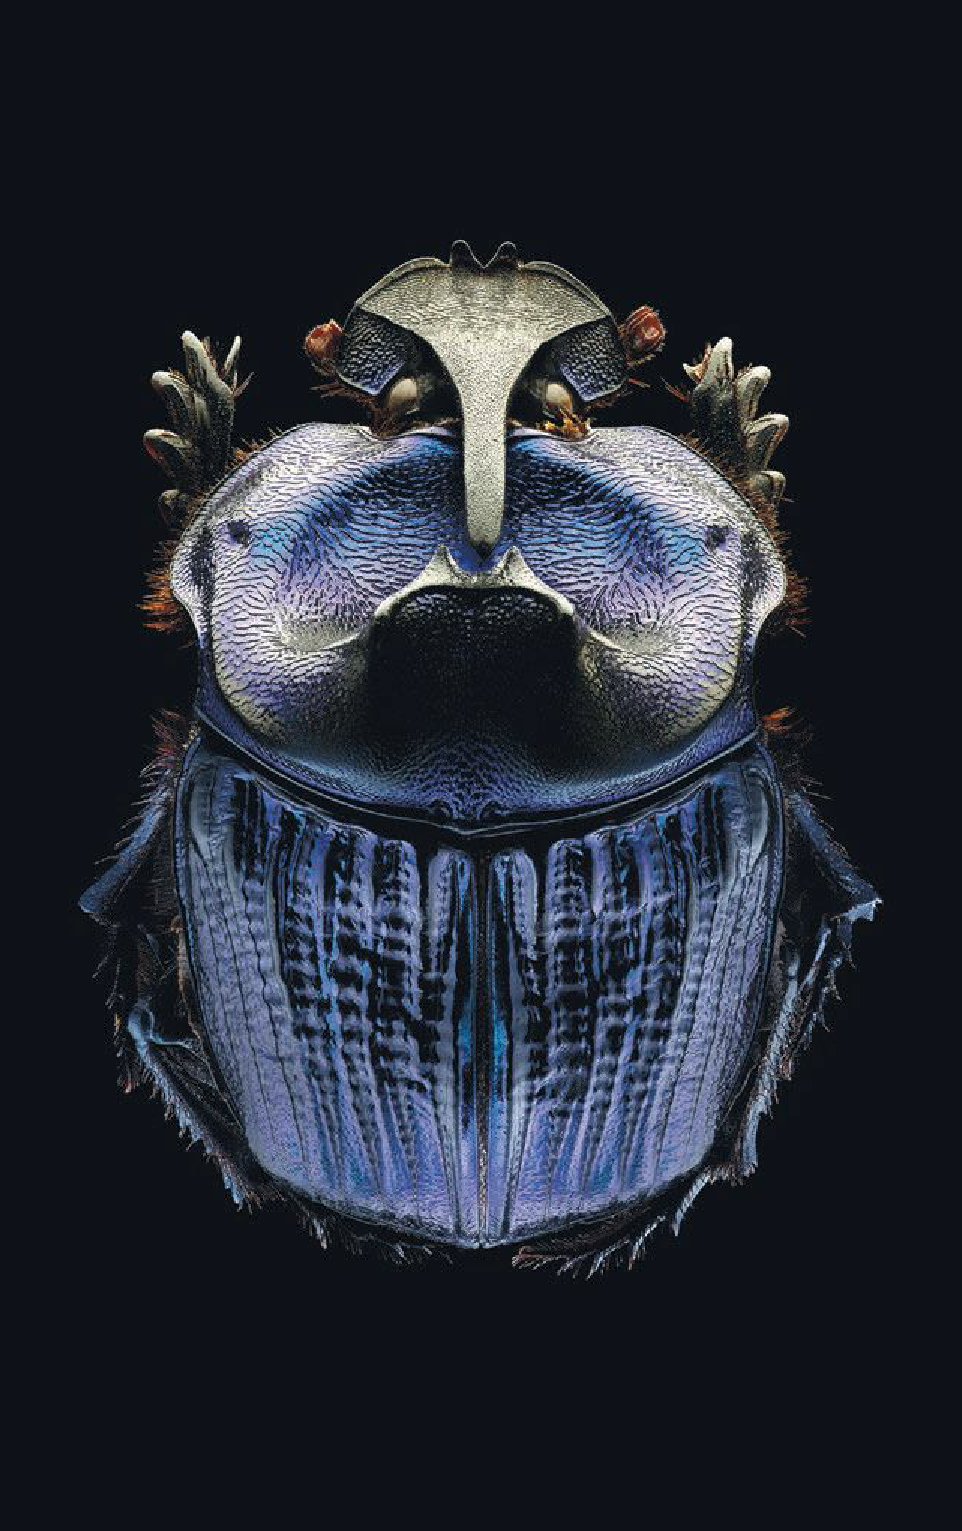 Pleasing fungus beetle and Amazonian purple warrior scarab at the Fernbank Museum of Natural History PHOTO BY LEVON BISS